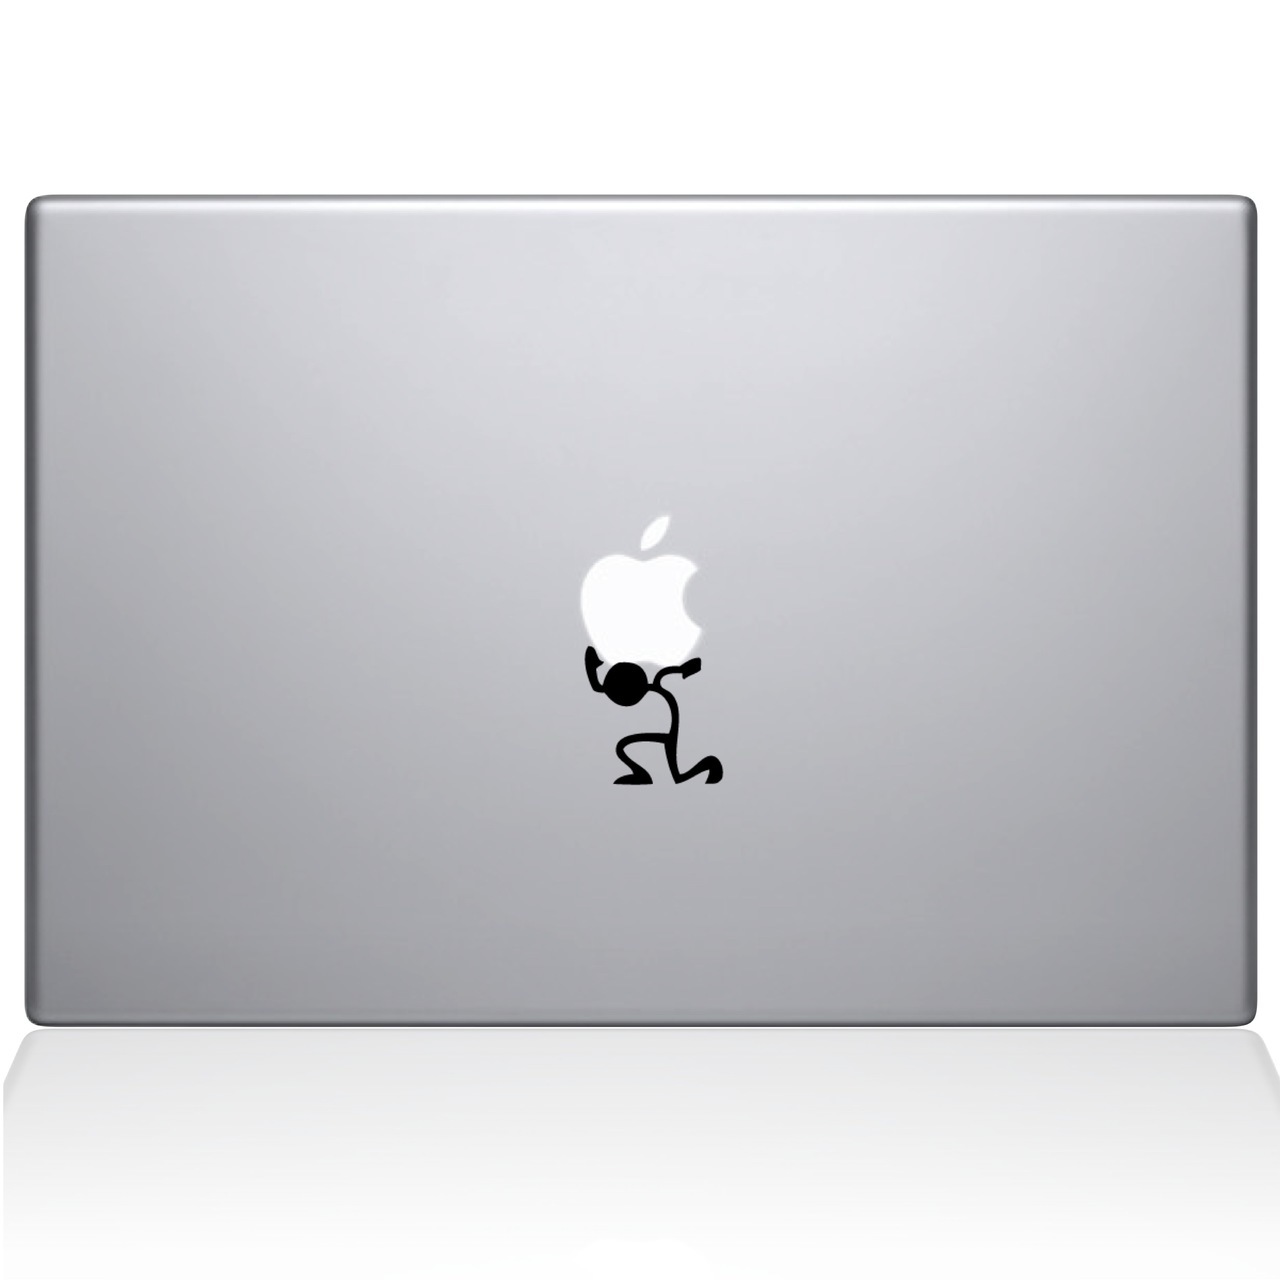 Apple Mac Stickers For Laptops